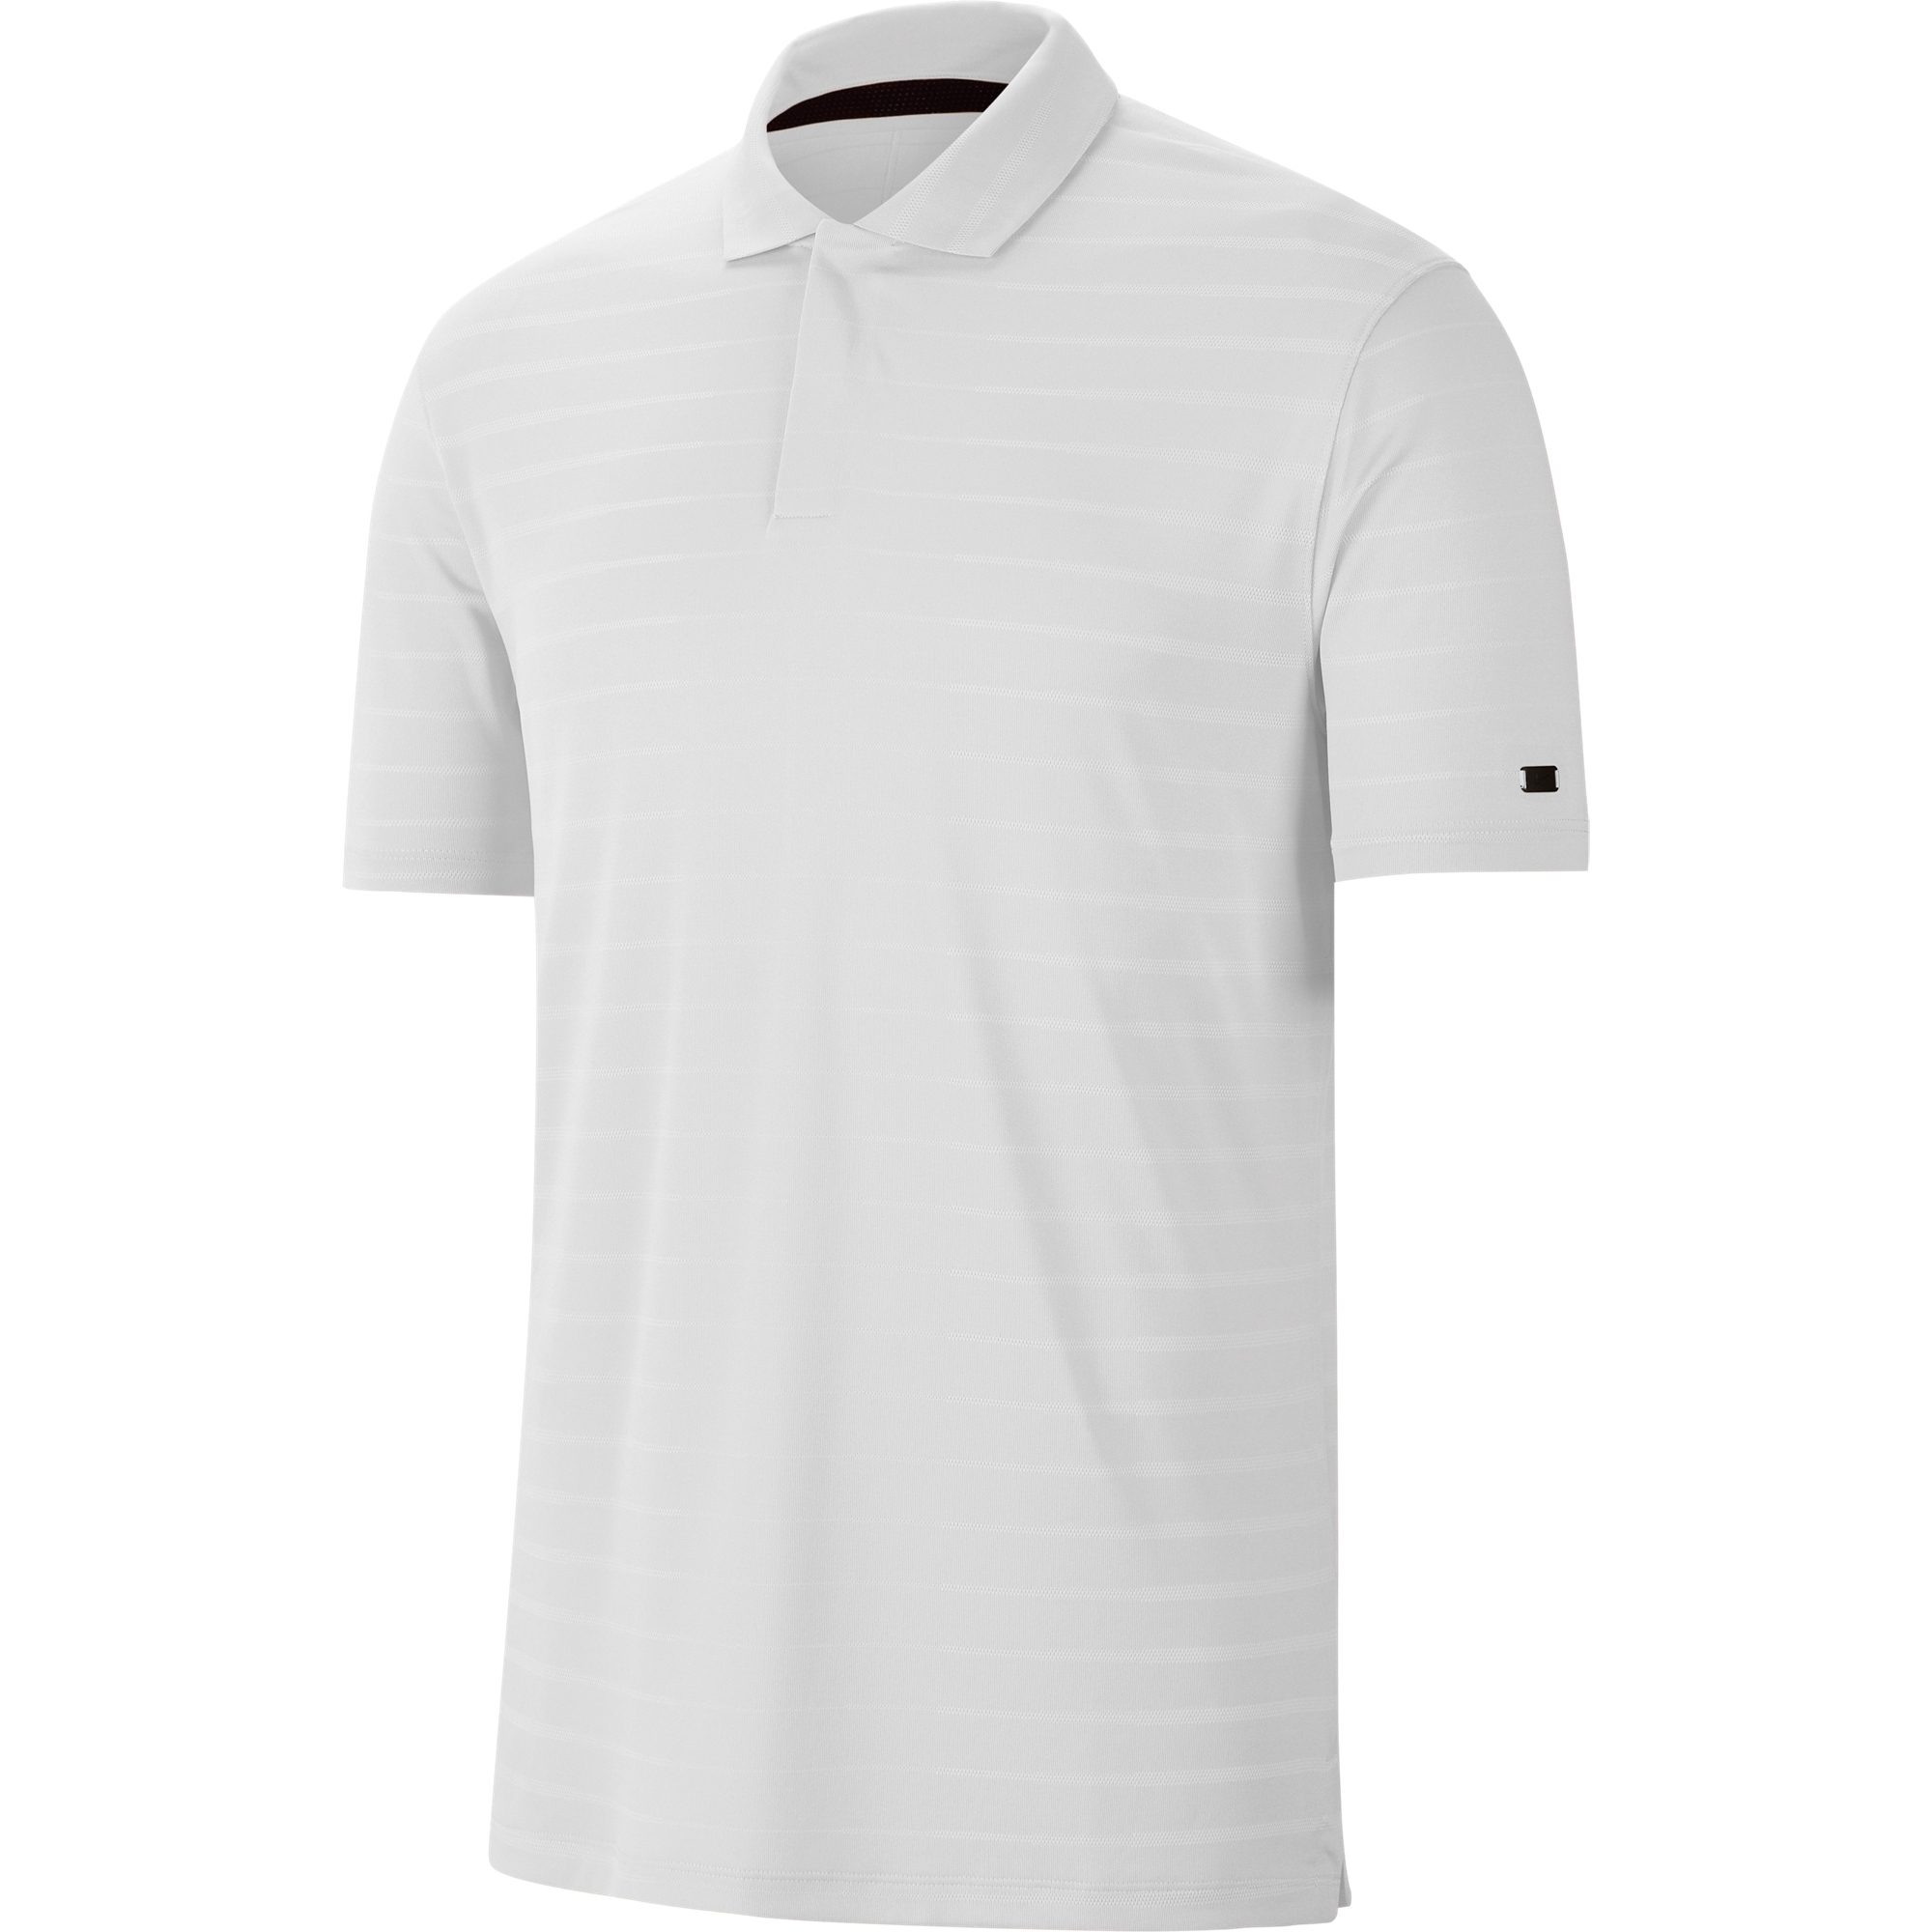 Nike Mens Dry Fit Sweat Wicking Golf Polo Shirt 2XL- Chest 48.5-53.5’